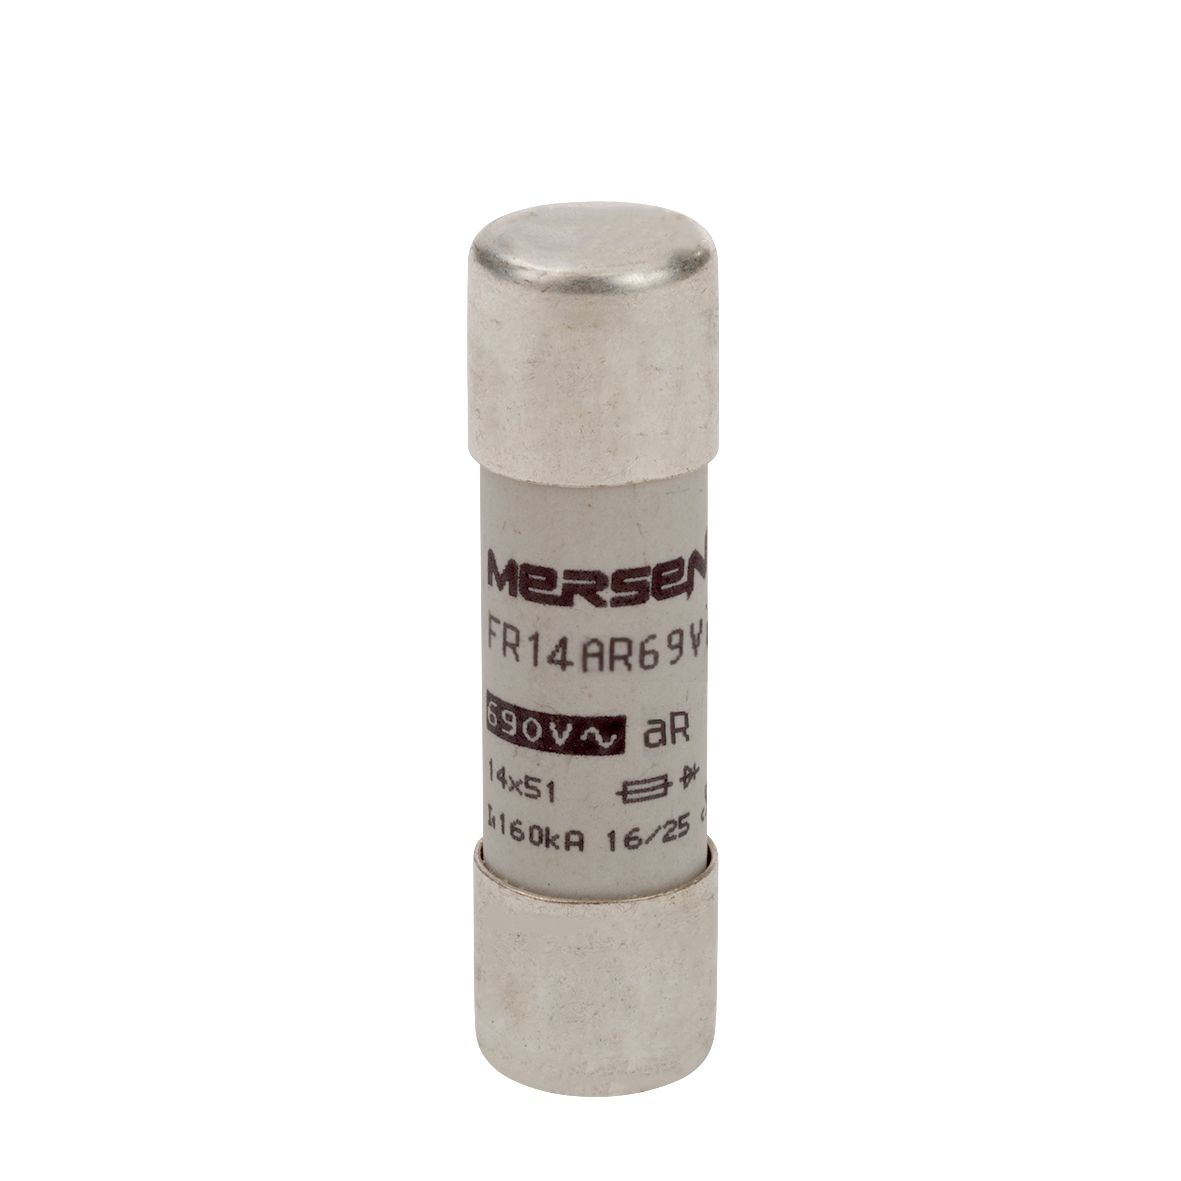 P1027331 - Cylindrical fuse-link aR 690VAC 14x51, 25A, without indicator